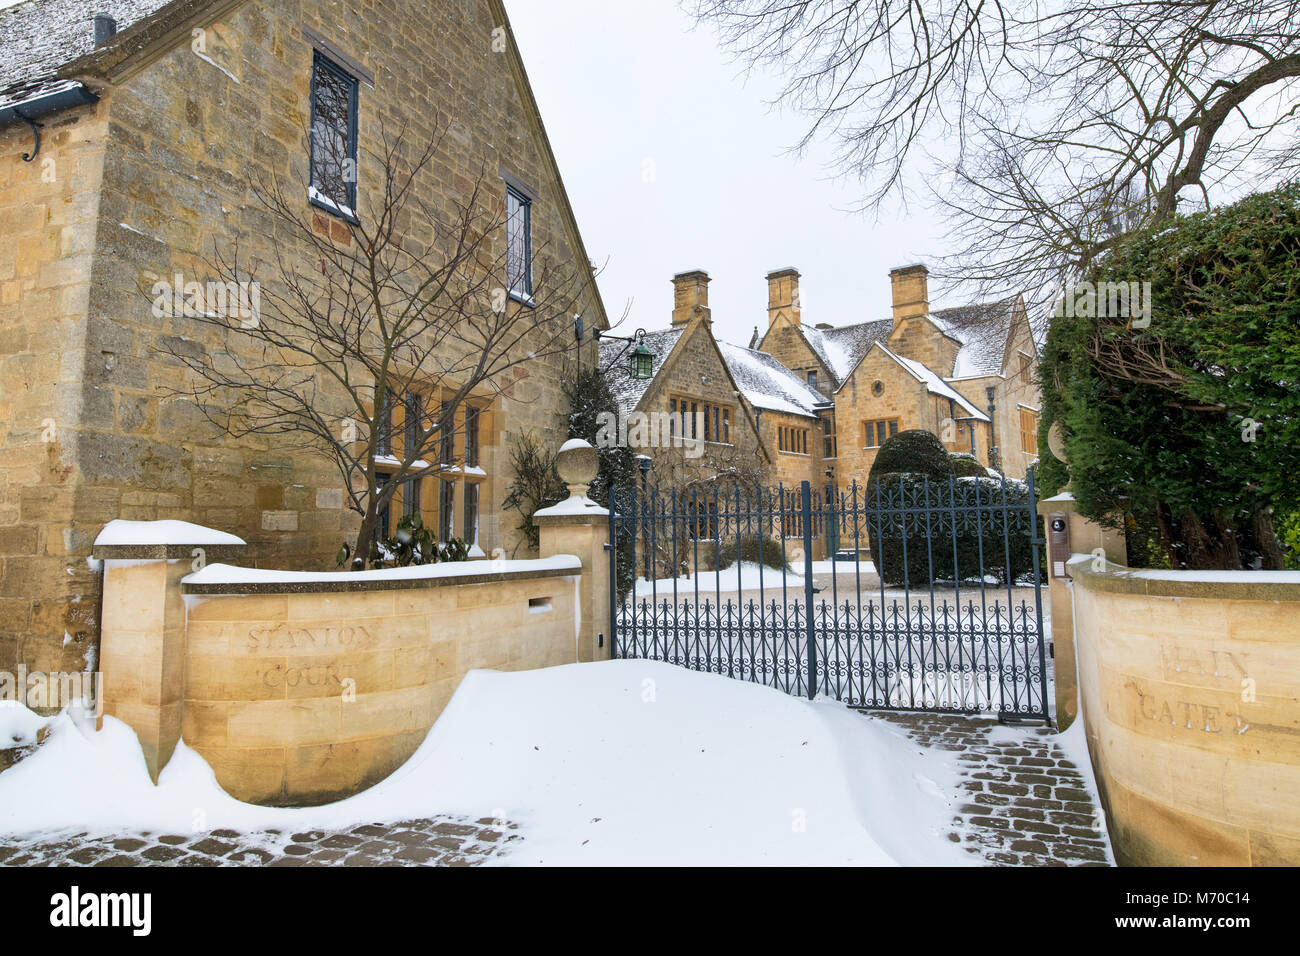 Stanton court Jacobean Manor House in the winter snow. Stanton, Cotswolds, Worcestershire, England Stock Photo